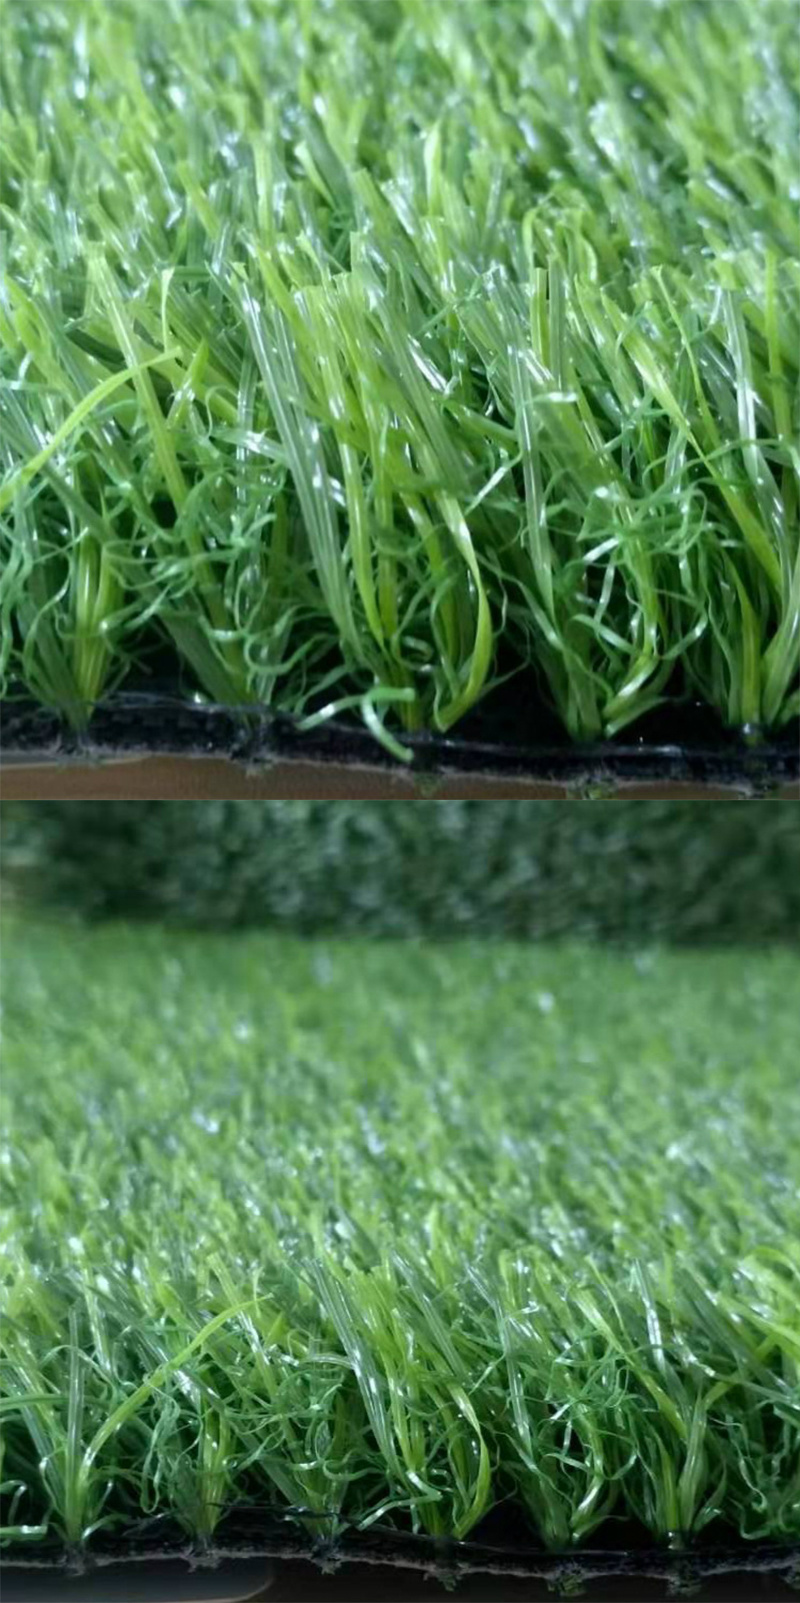 Chinese Suppliers Artificial Grass Turf Carpet Synthetic Grass